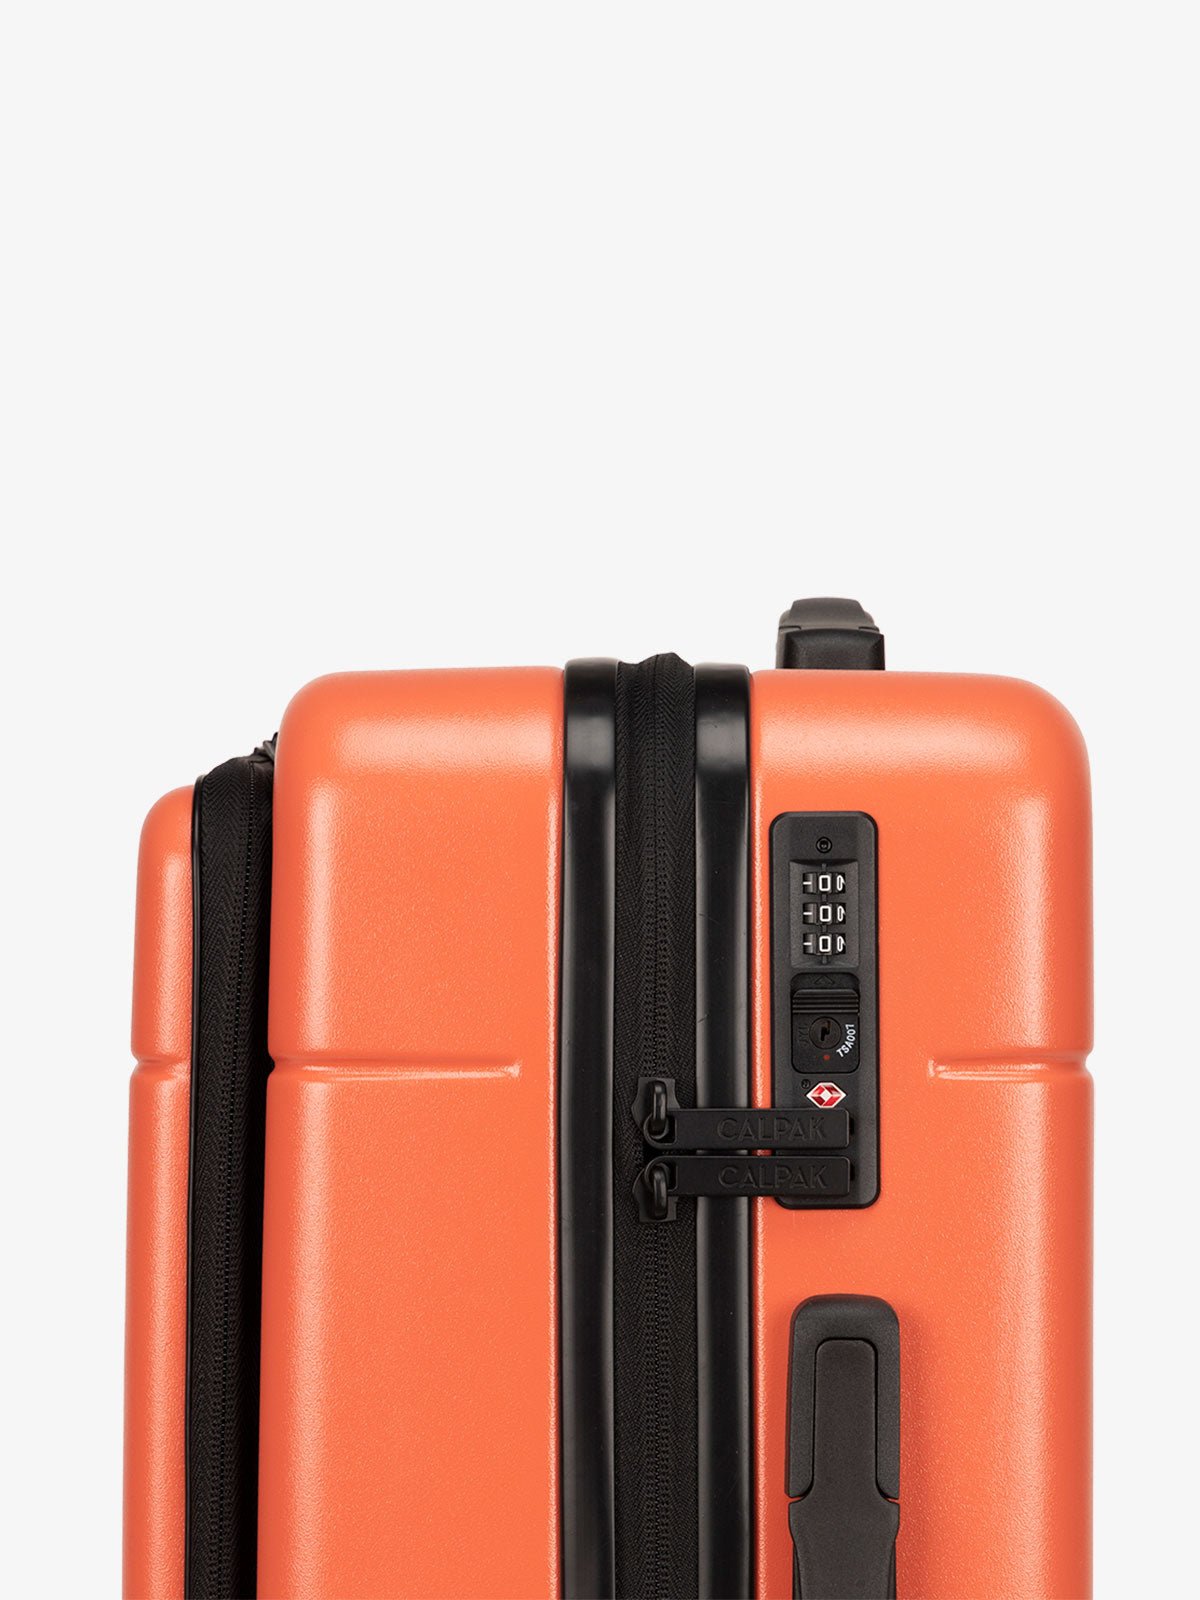 tsa-approved lock for carry-on luggage